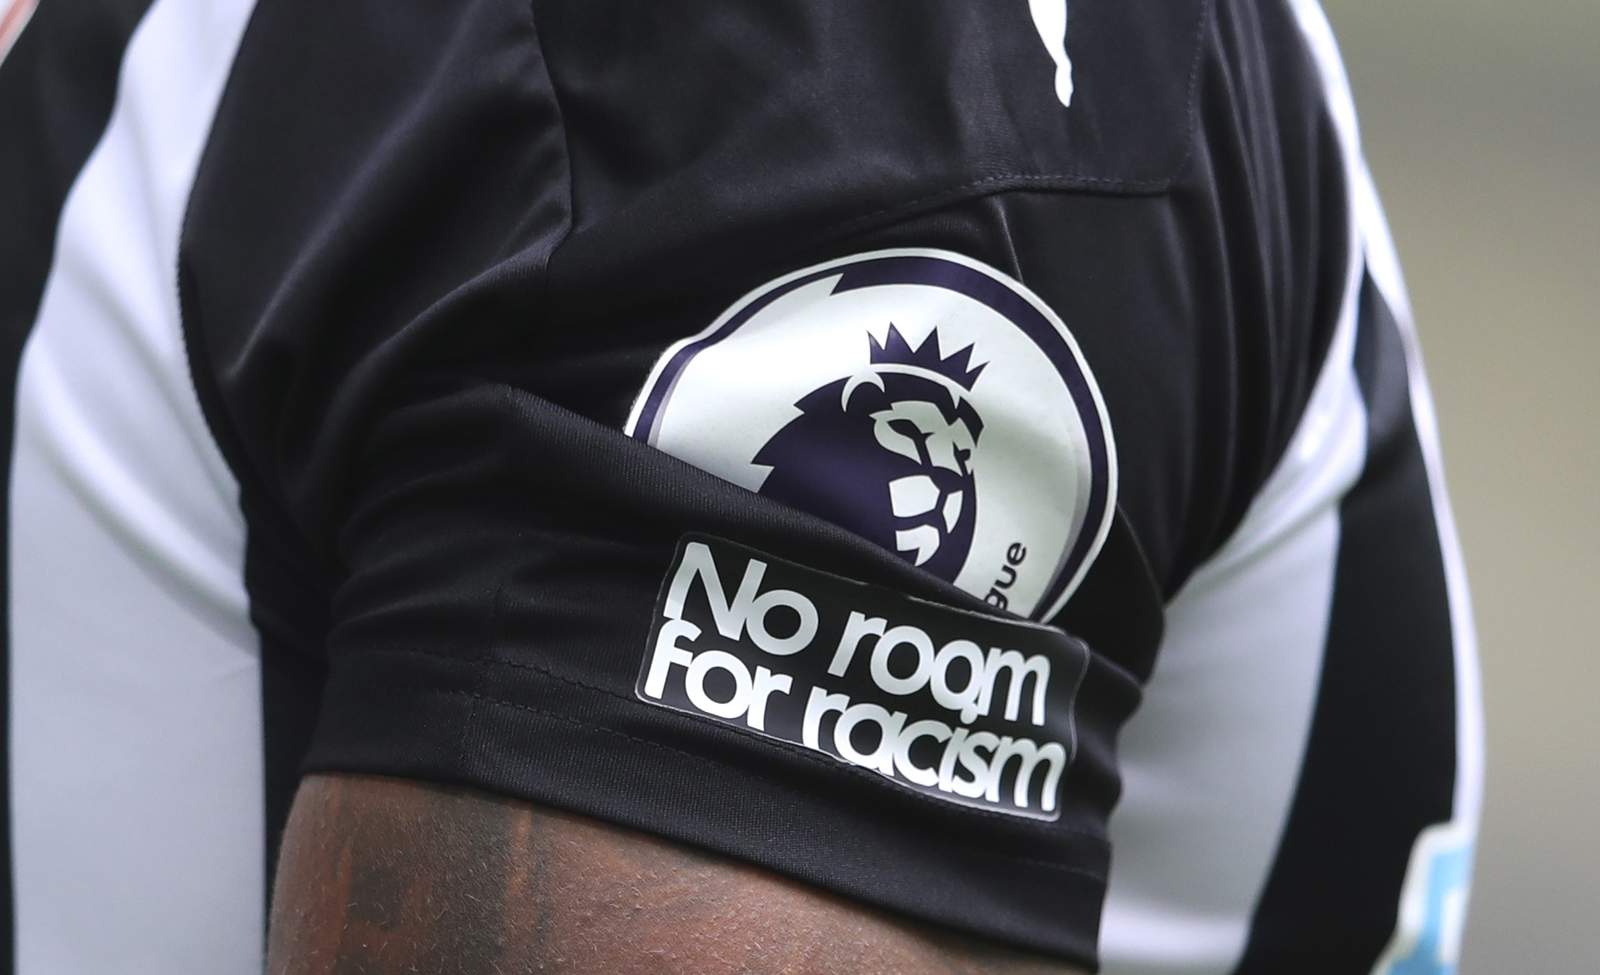 English soccer heads ask Zuckerberg, Dorsey to act on racism